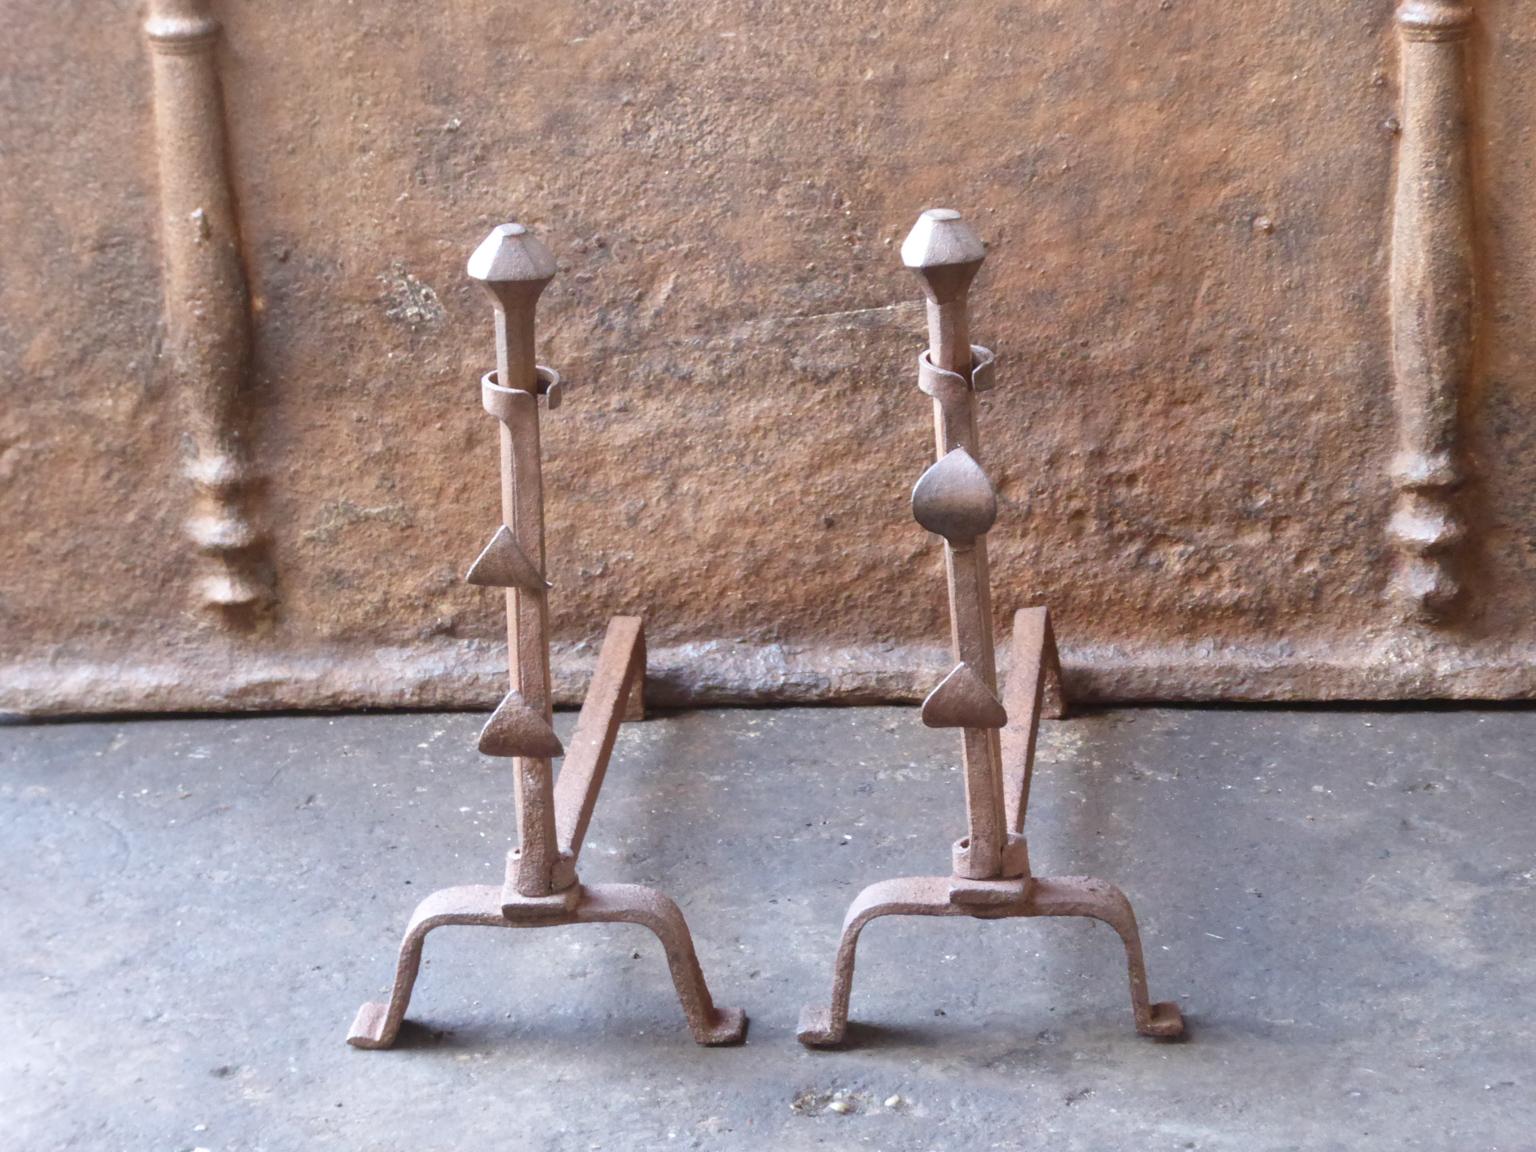 19th century French Napoleon III andirons made of hand forged wrought iron. The andirons are in a good condition and fit for use in the fireplace.